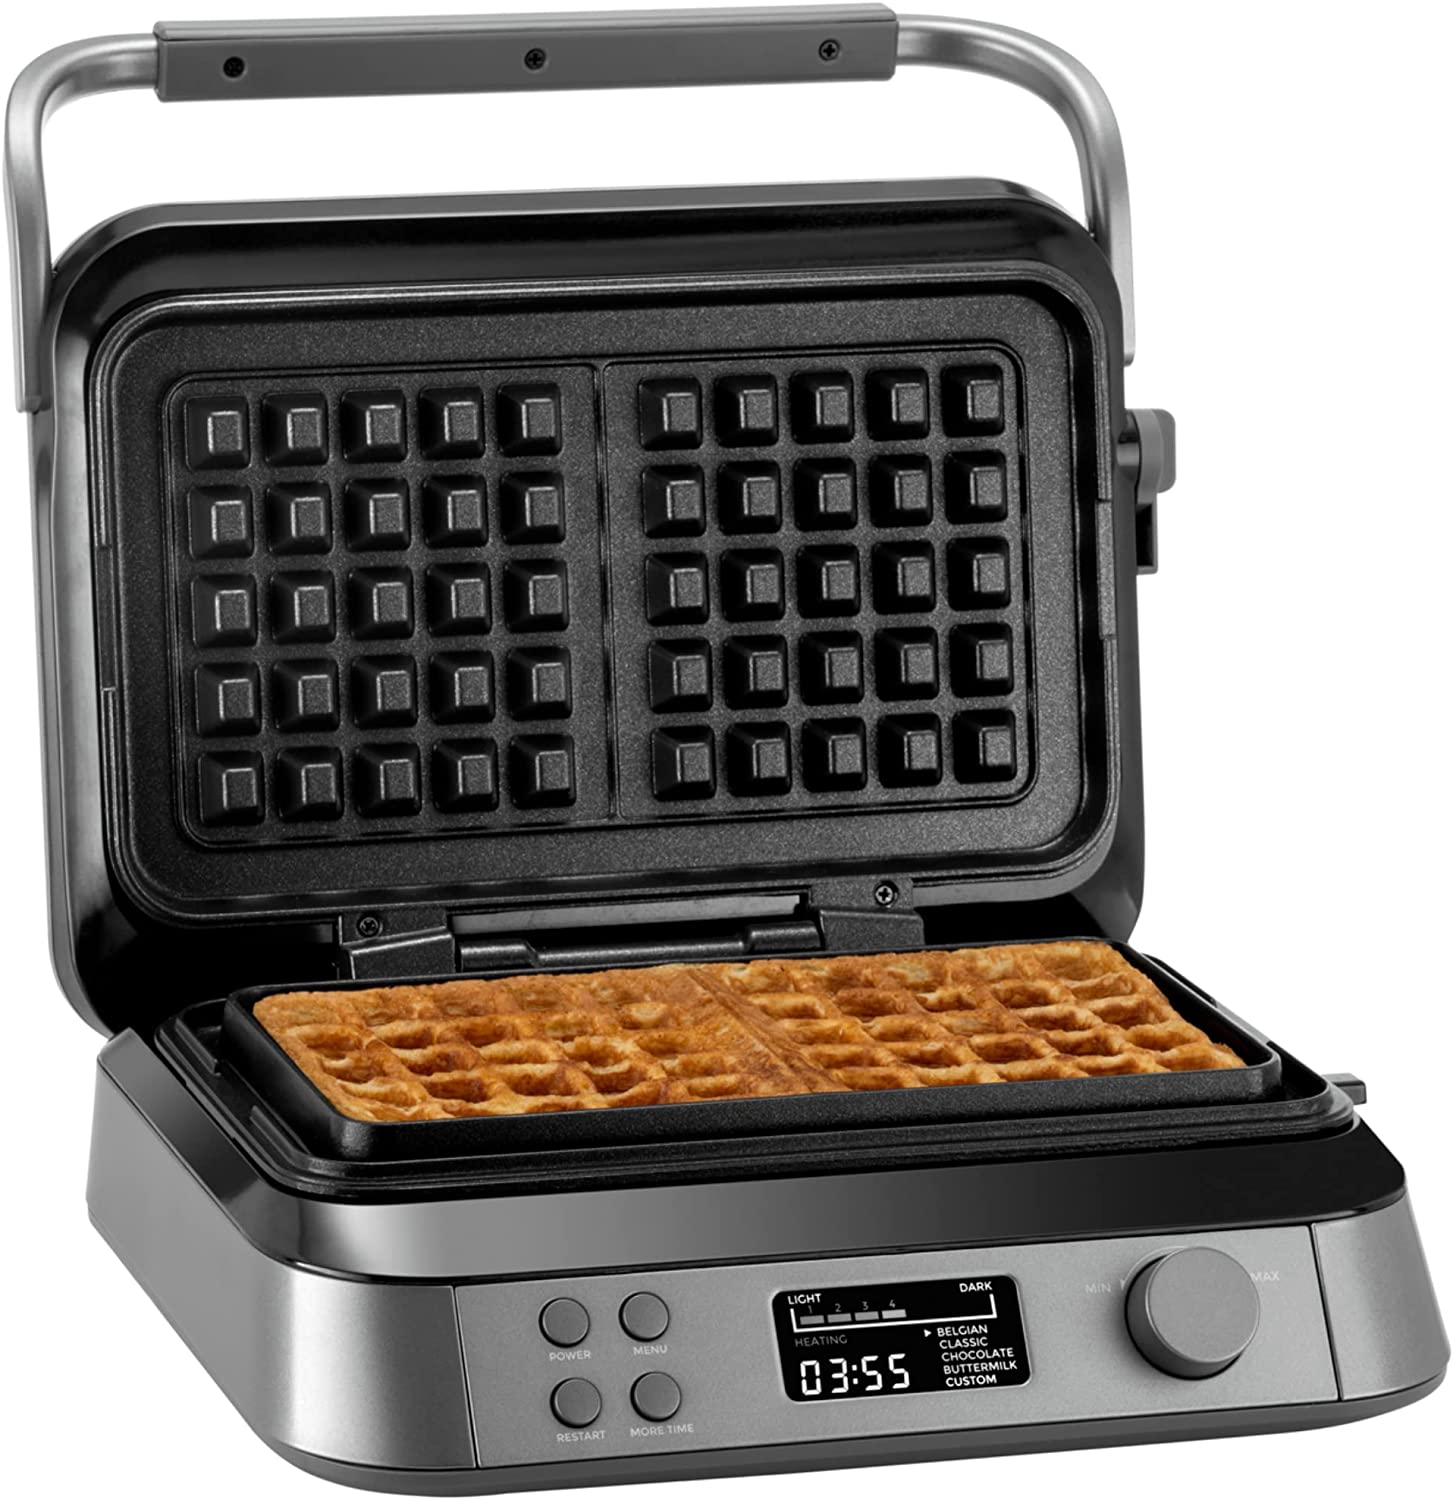 Klamer Belgian Waffle Iron Double With 7 Levels and 5 Programs, Plates with non-Stick Coating, 1600 W, Grey